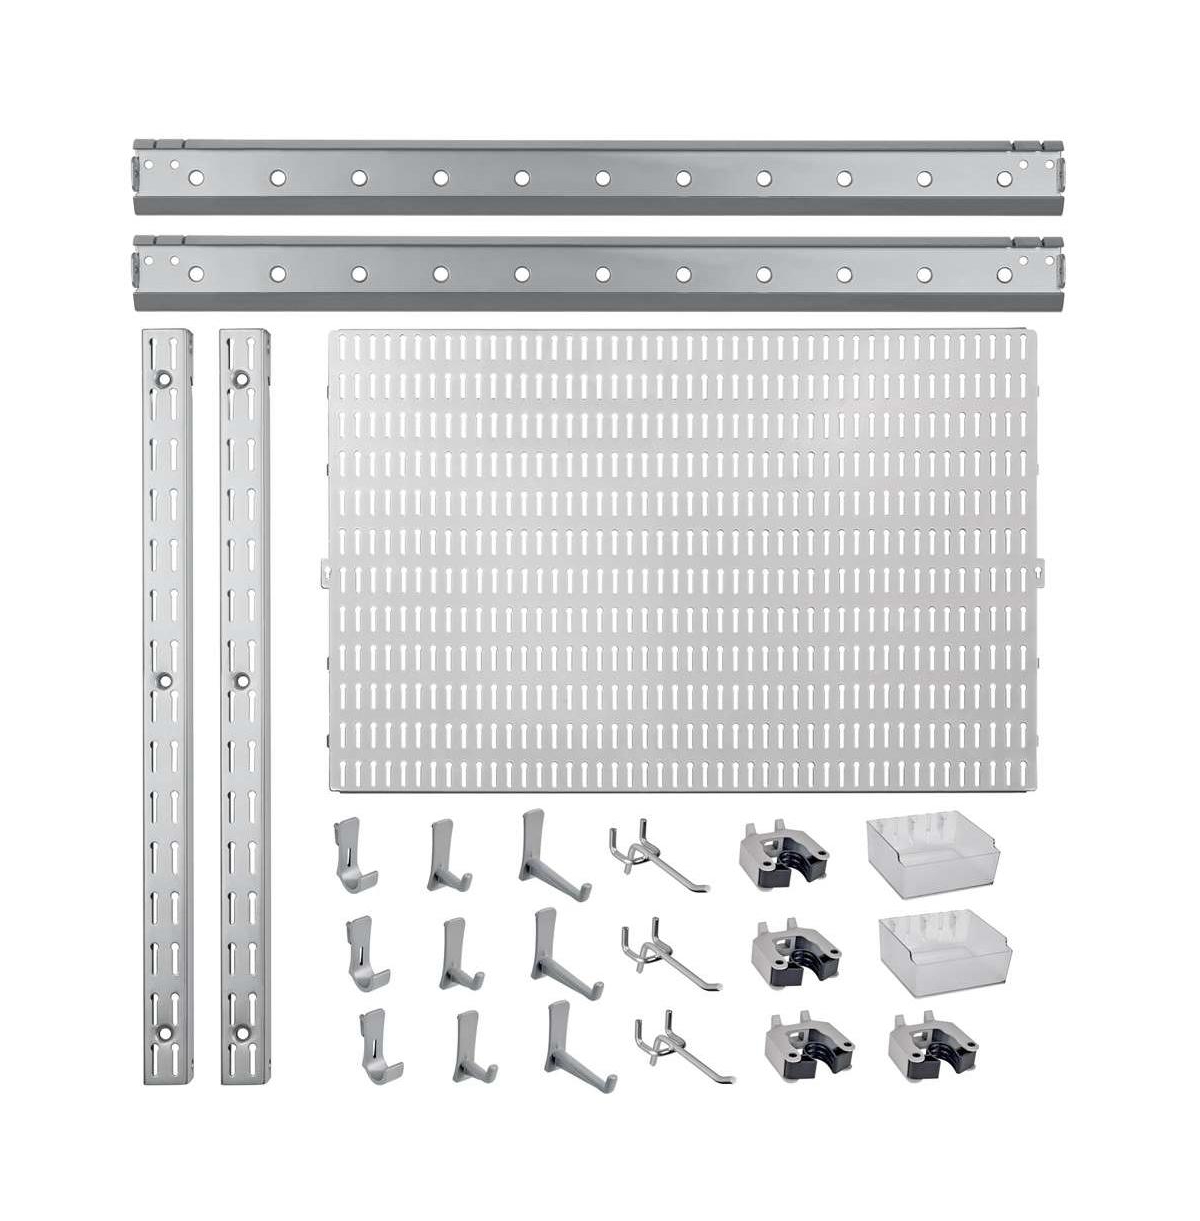 23 Piece Garage Organizer Wall Storage System with Pegboard, Hooks and Hangers - Grey